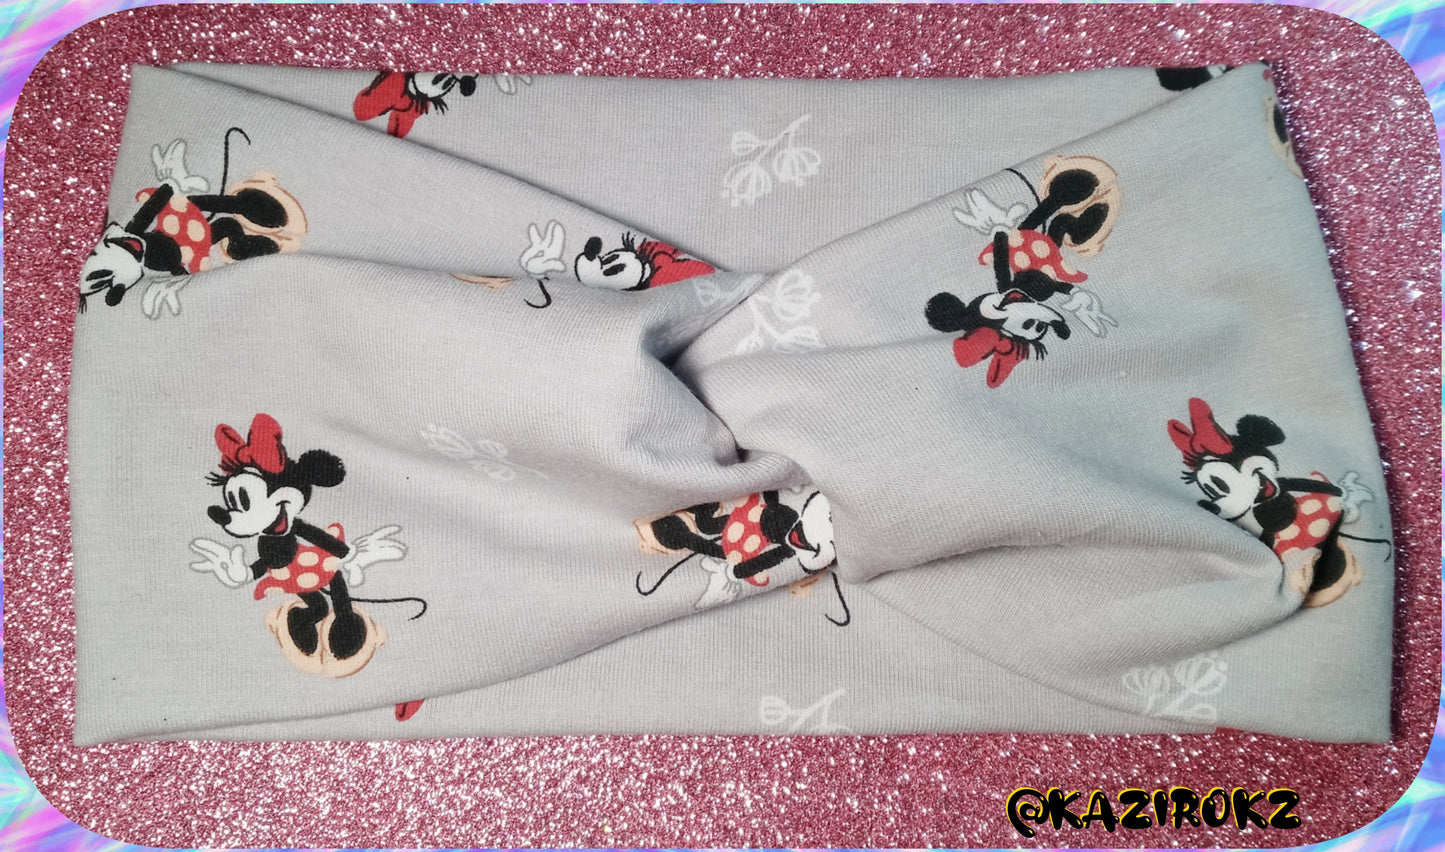 Minnie Mouse Knotted Headwrap (Gray/white flower)